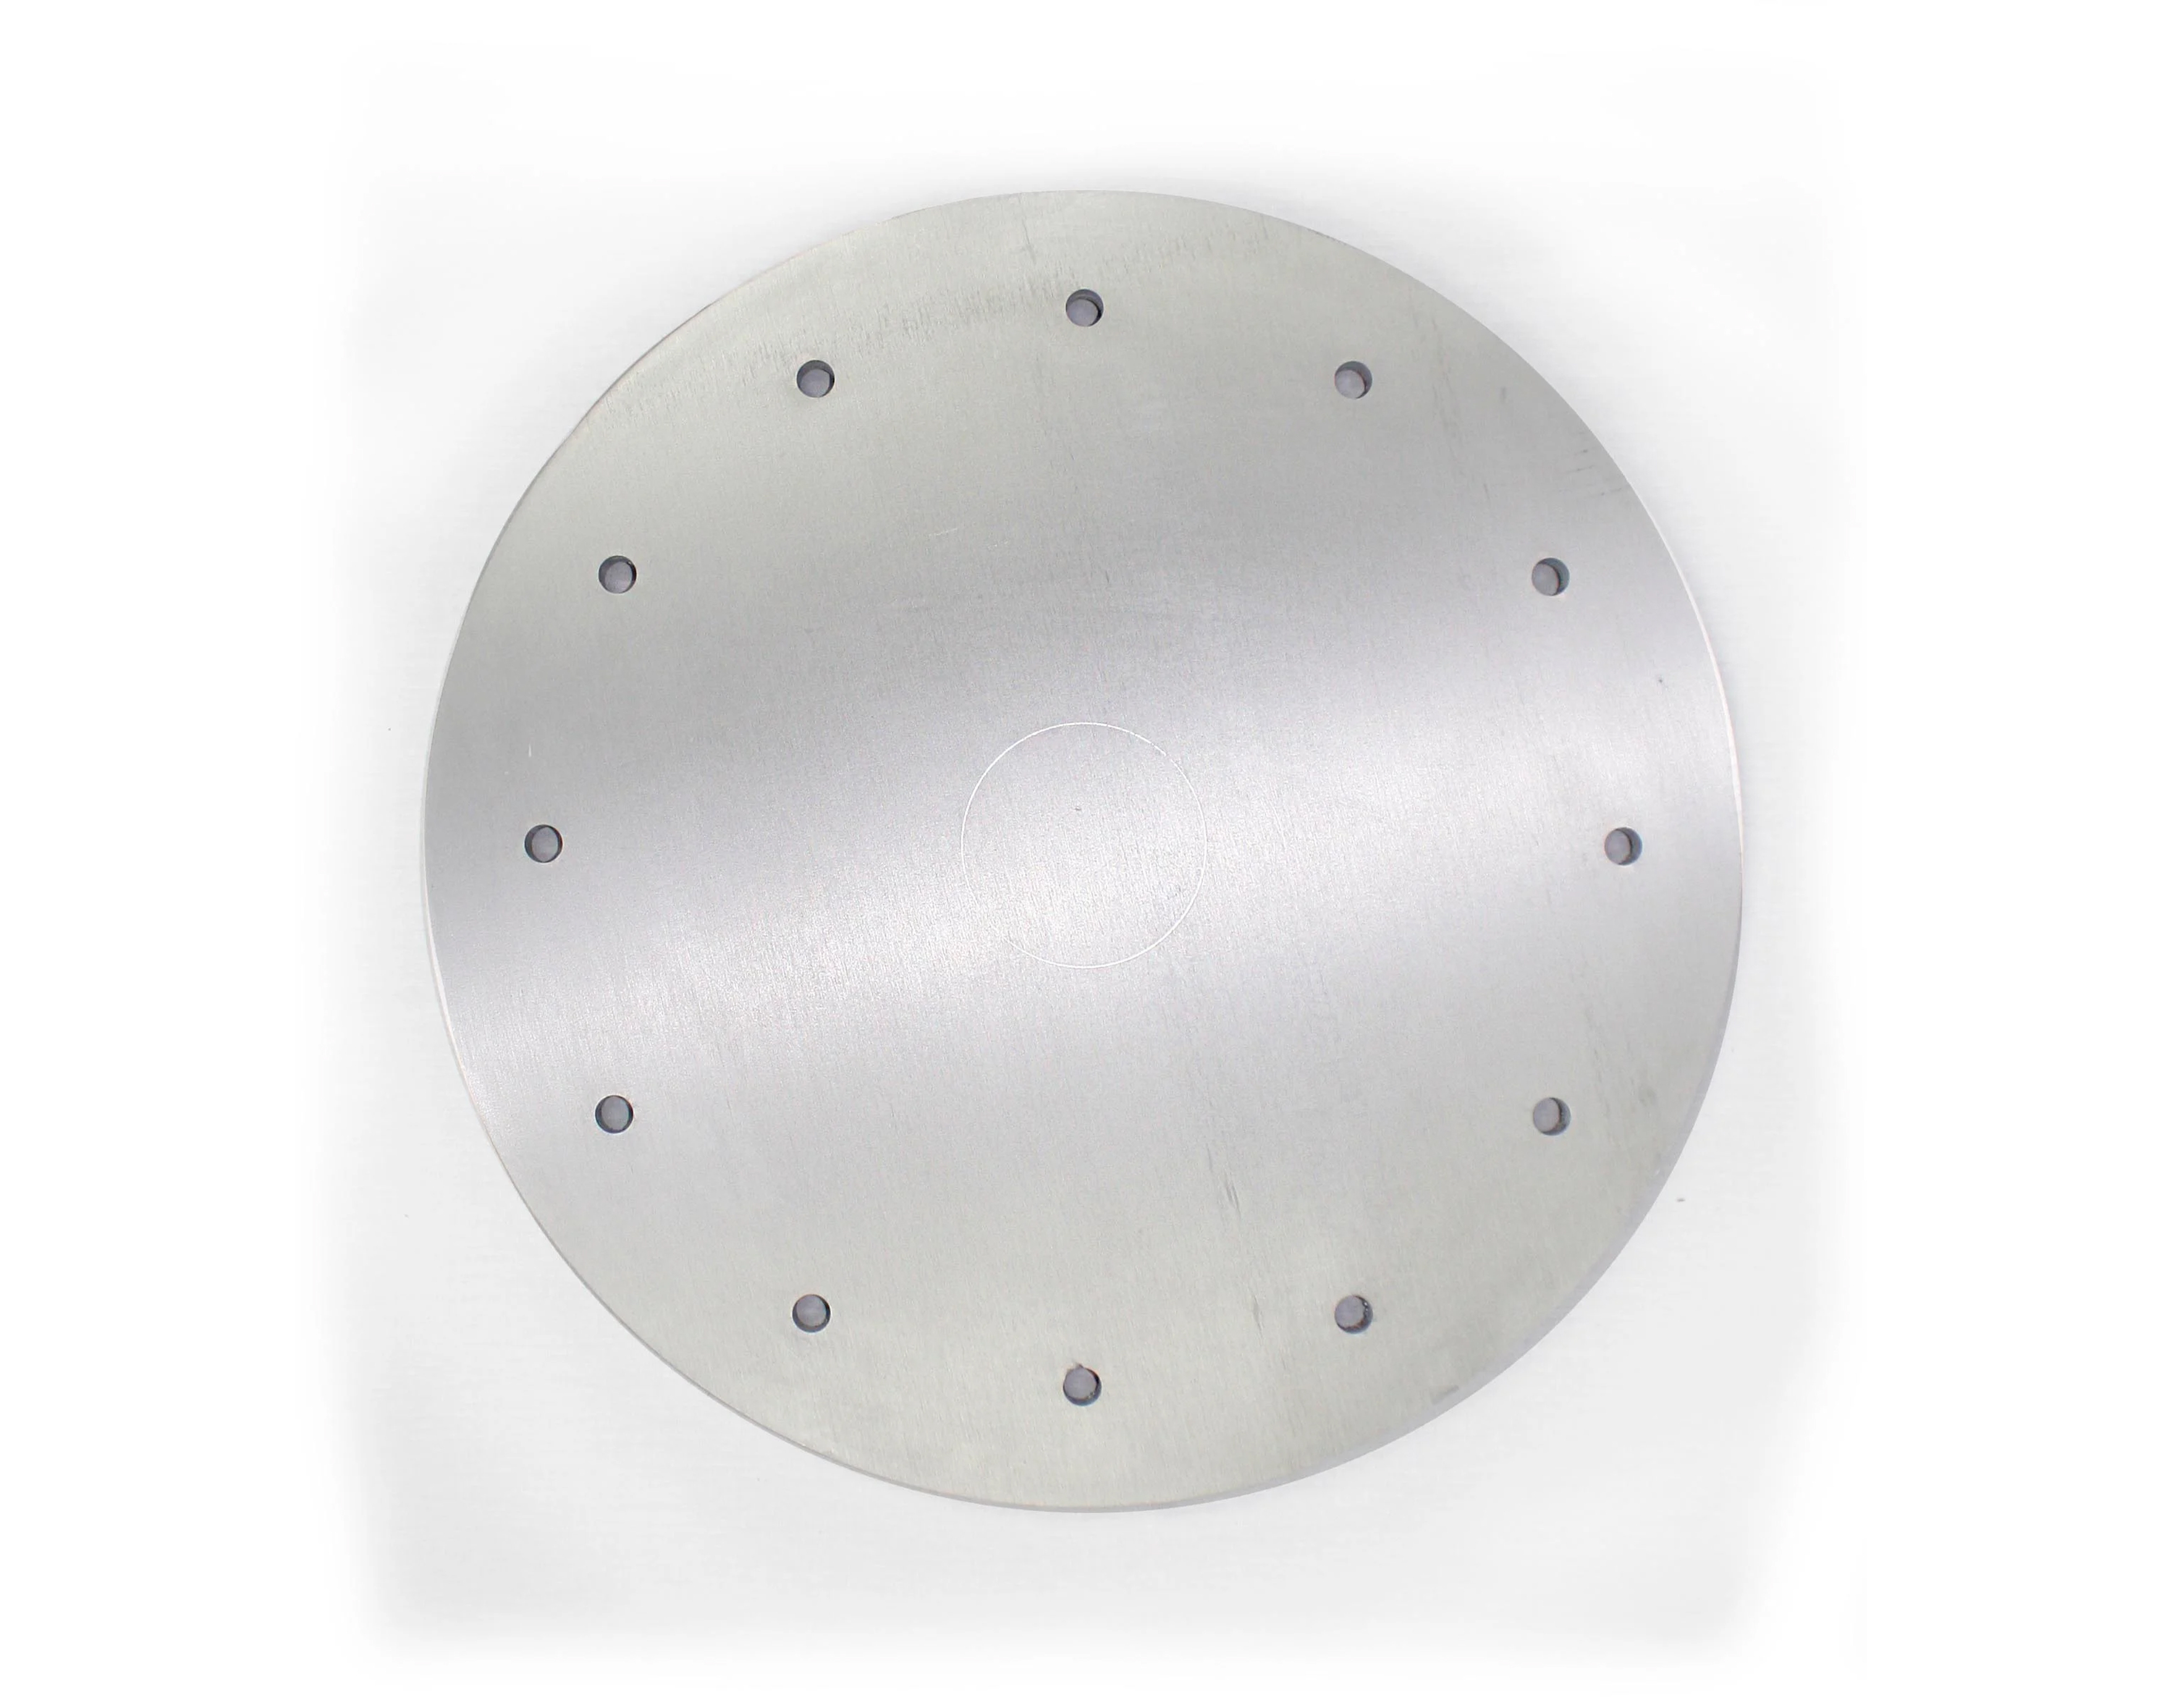 Aluminum - ½ in. flange—22 in. O.D. with (12) ⅝ in. holes equally spaced on an 18 in. dia B.C.